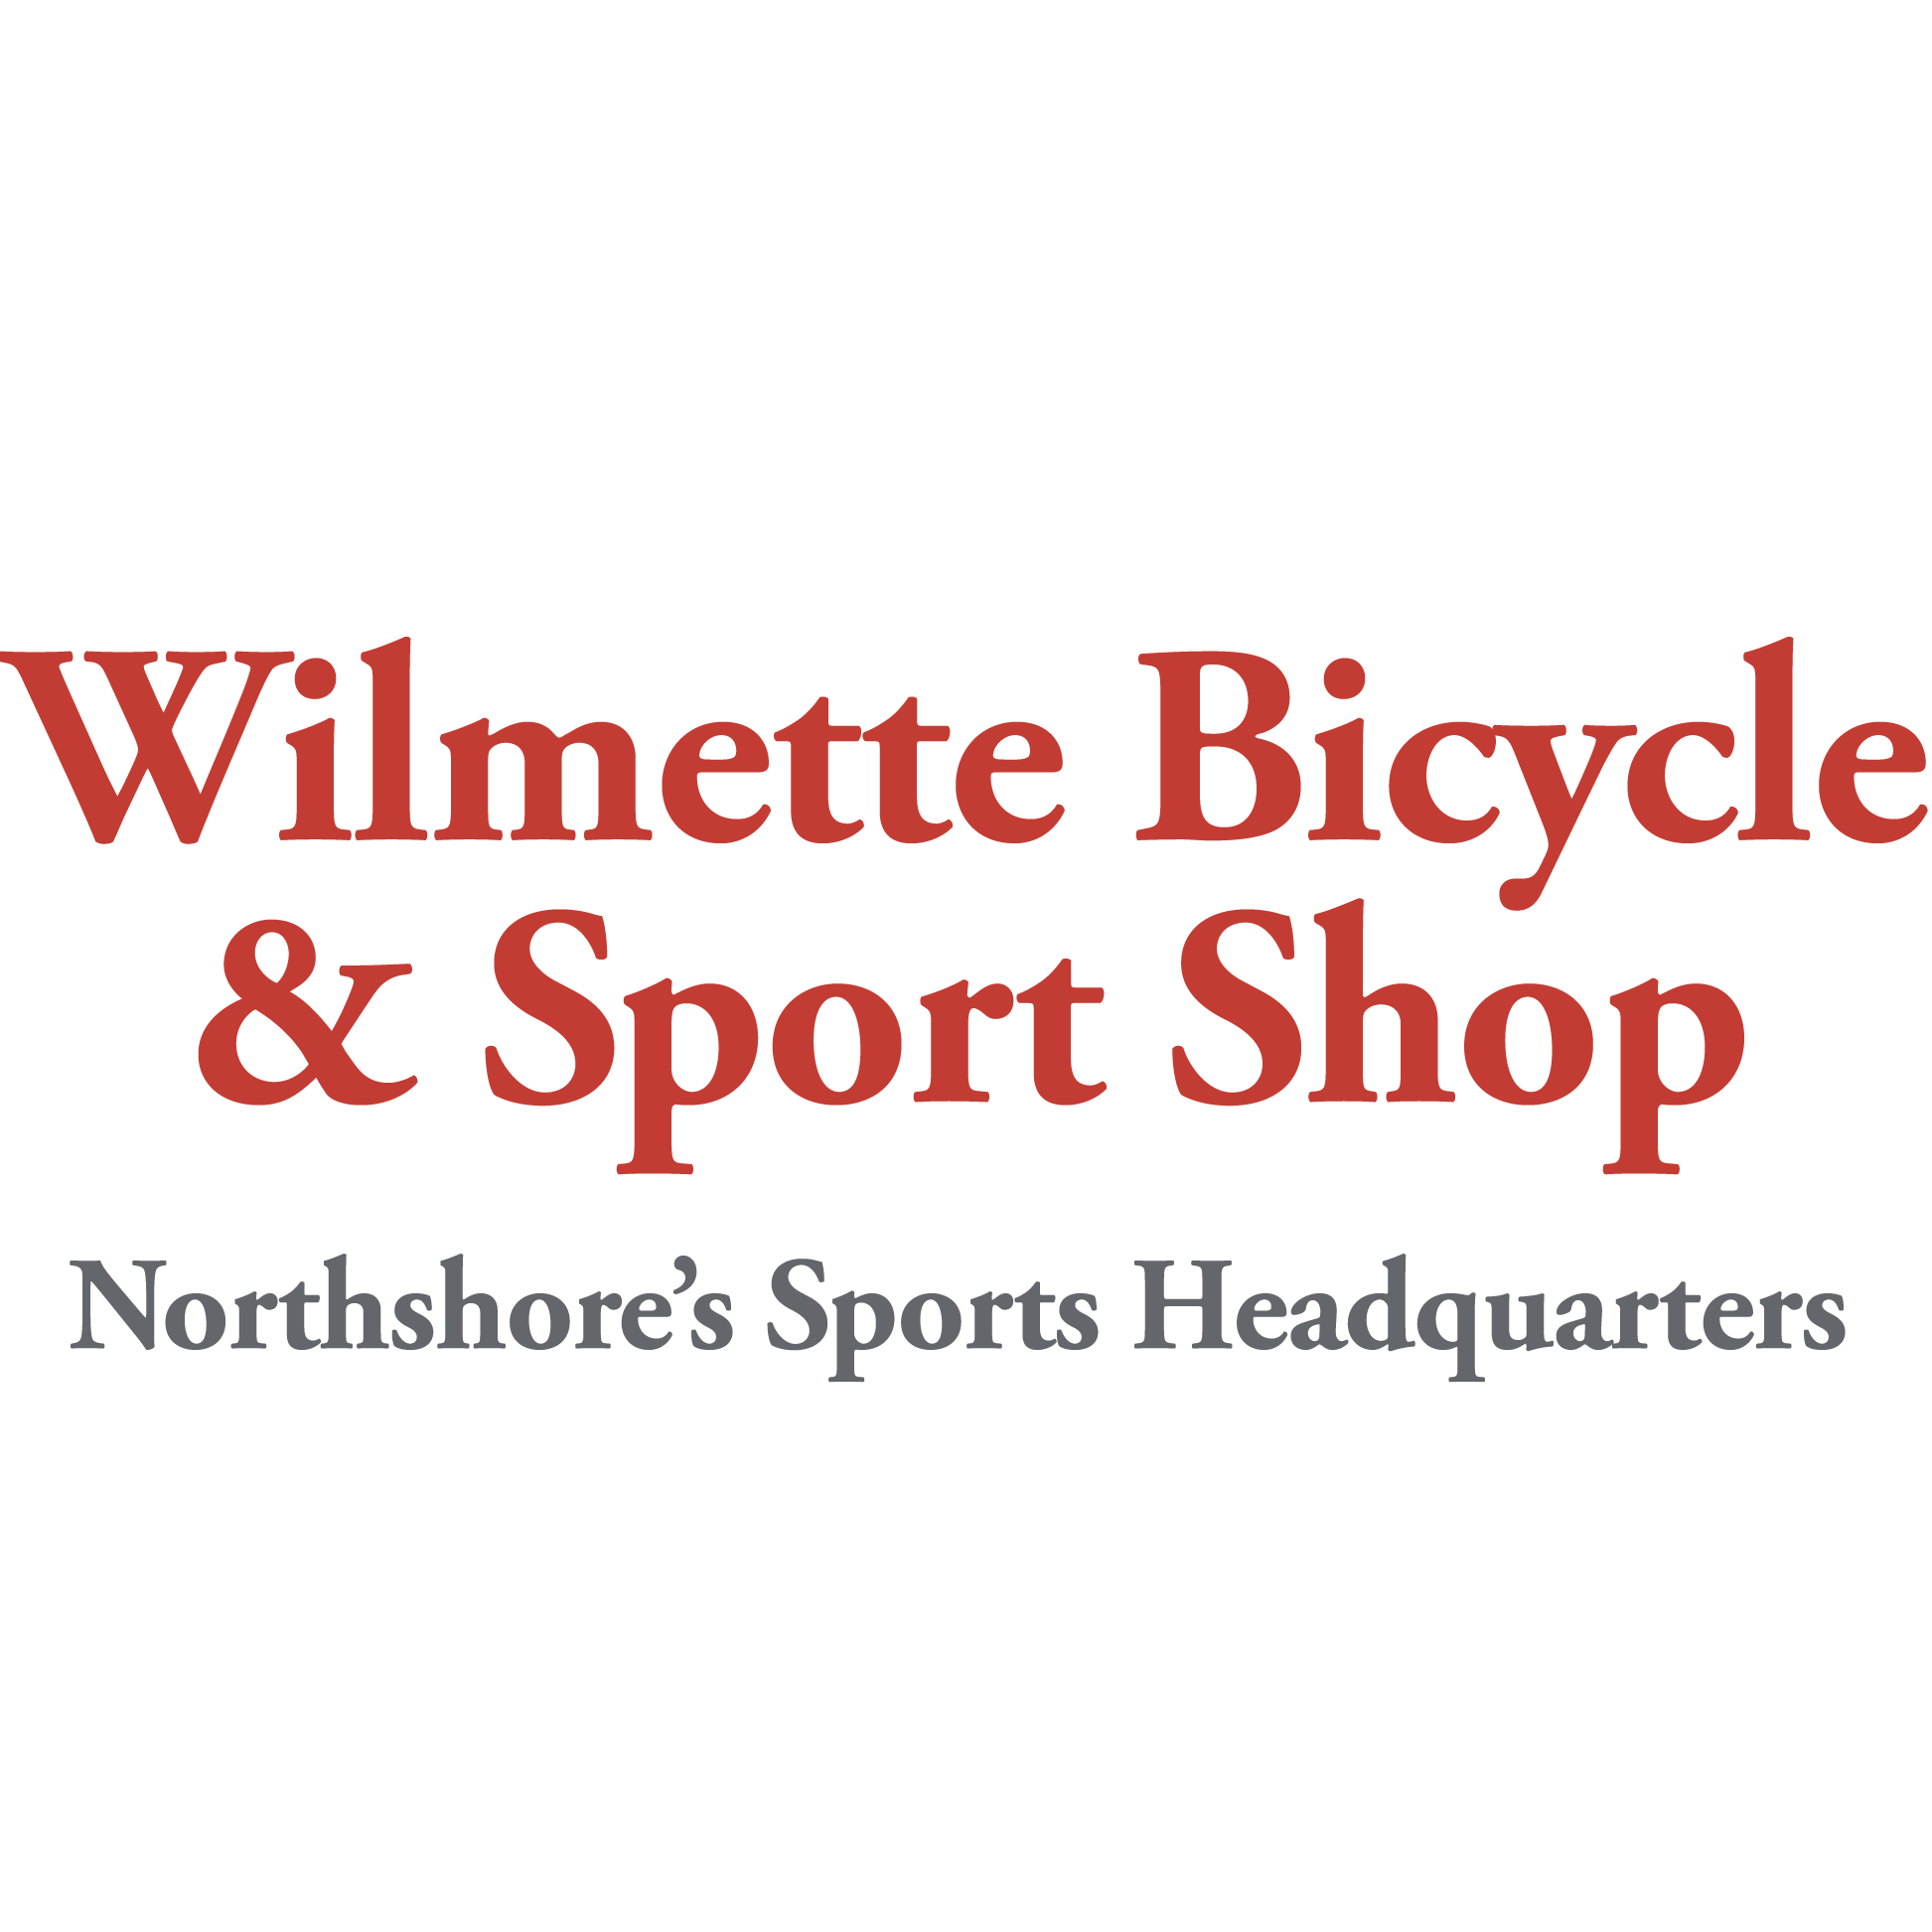 https://trevians.org/wp-content/uploads/sites/2831/2021/08/wilmette-bicycle-and-sport-shop-sq.png